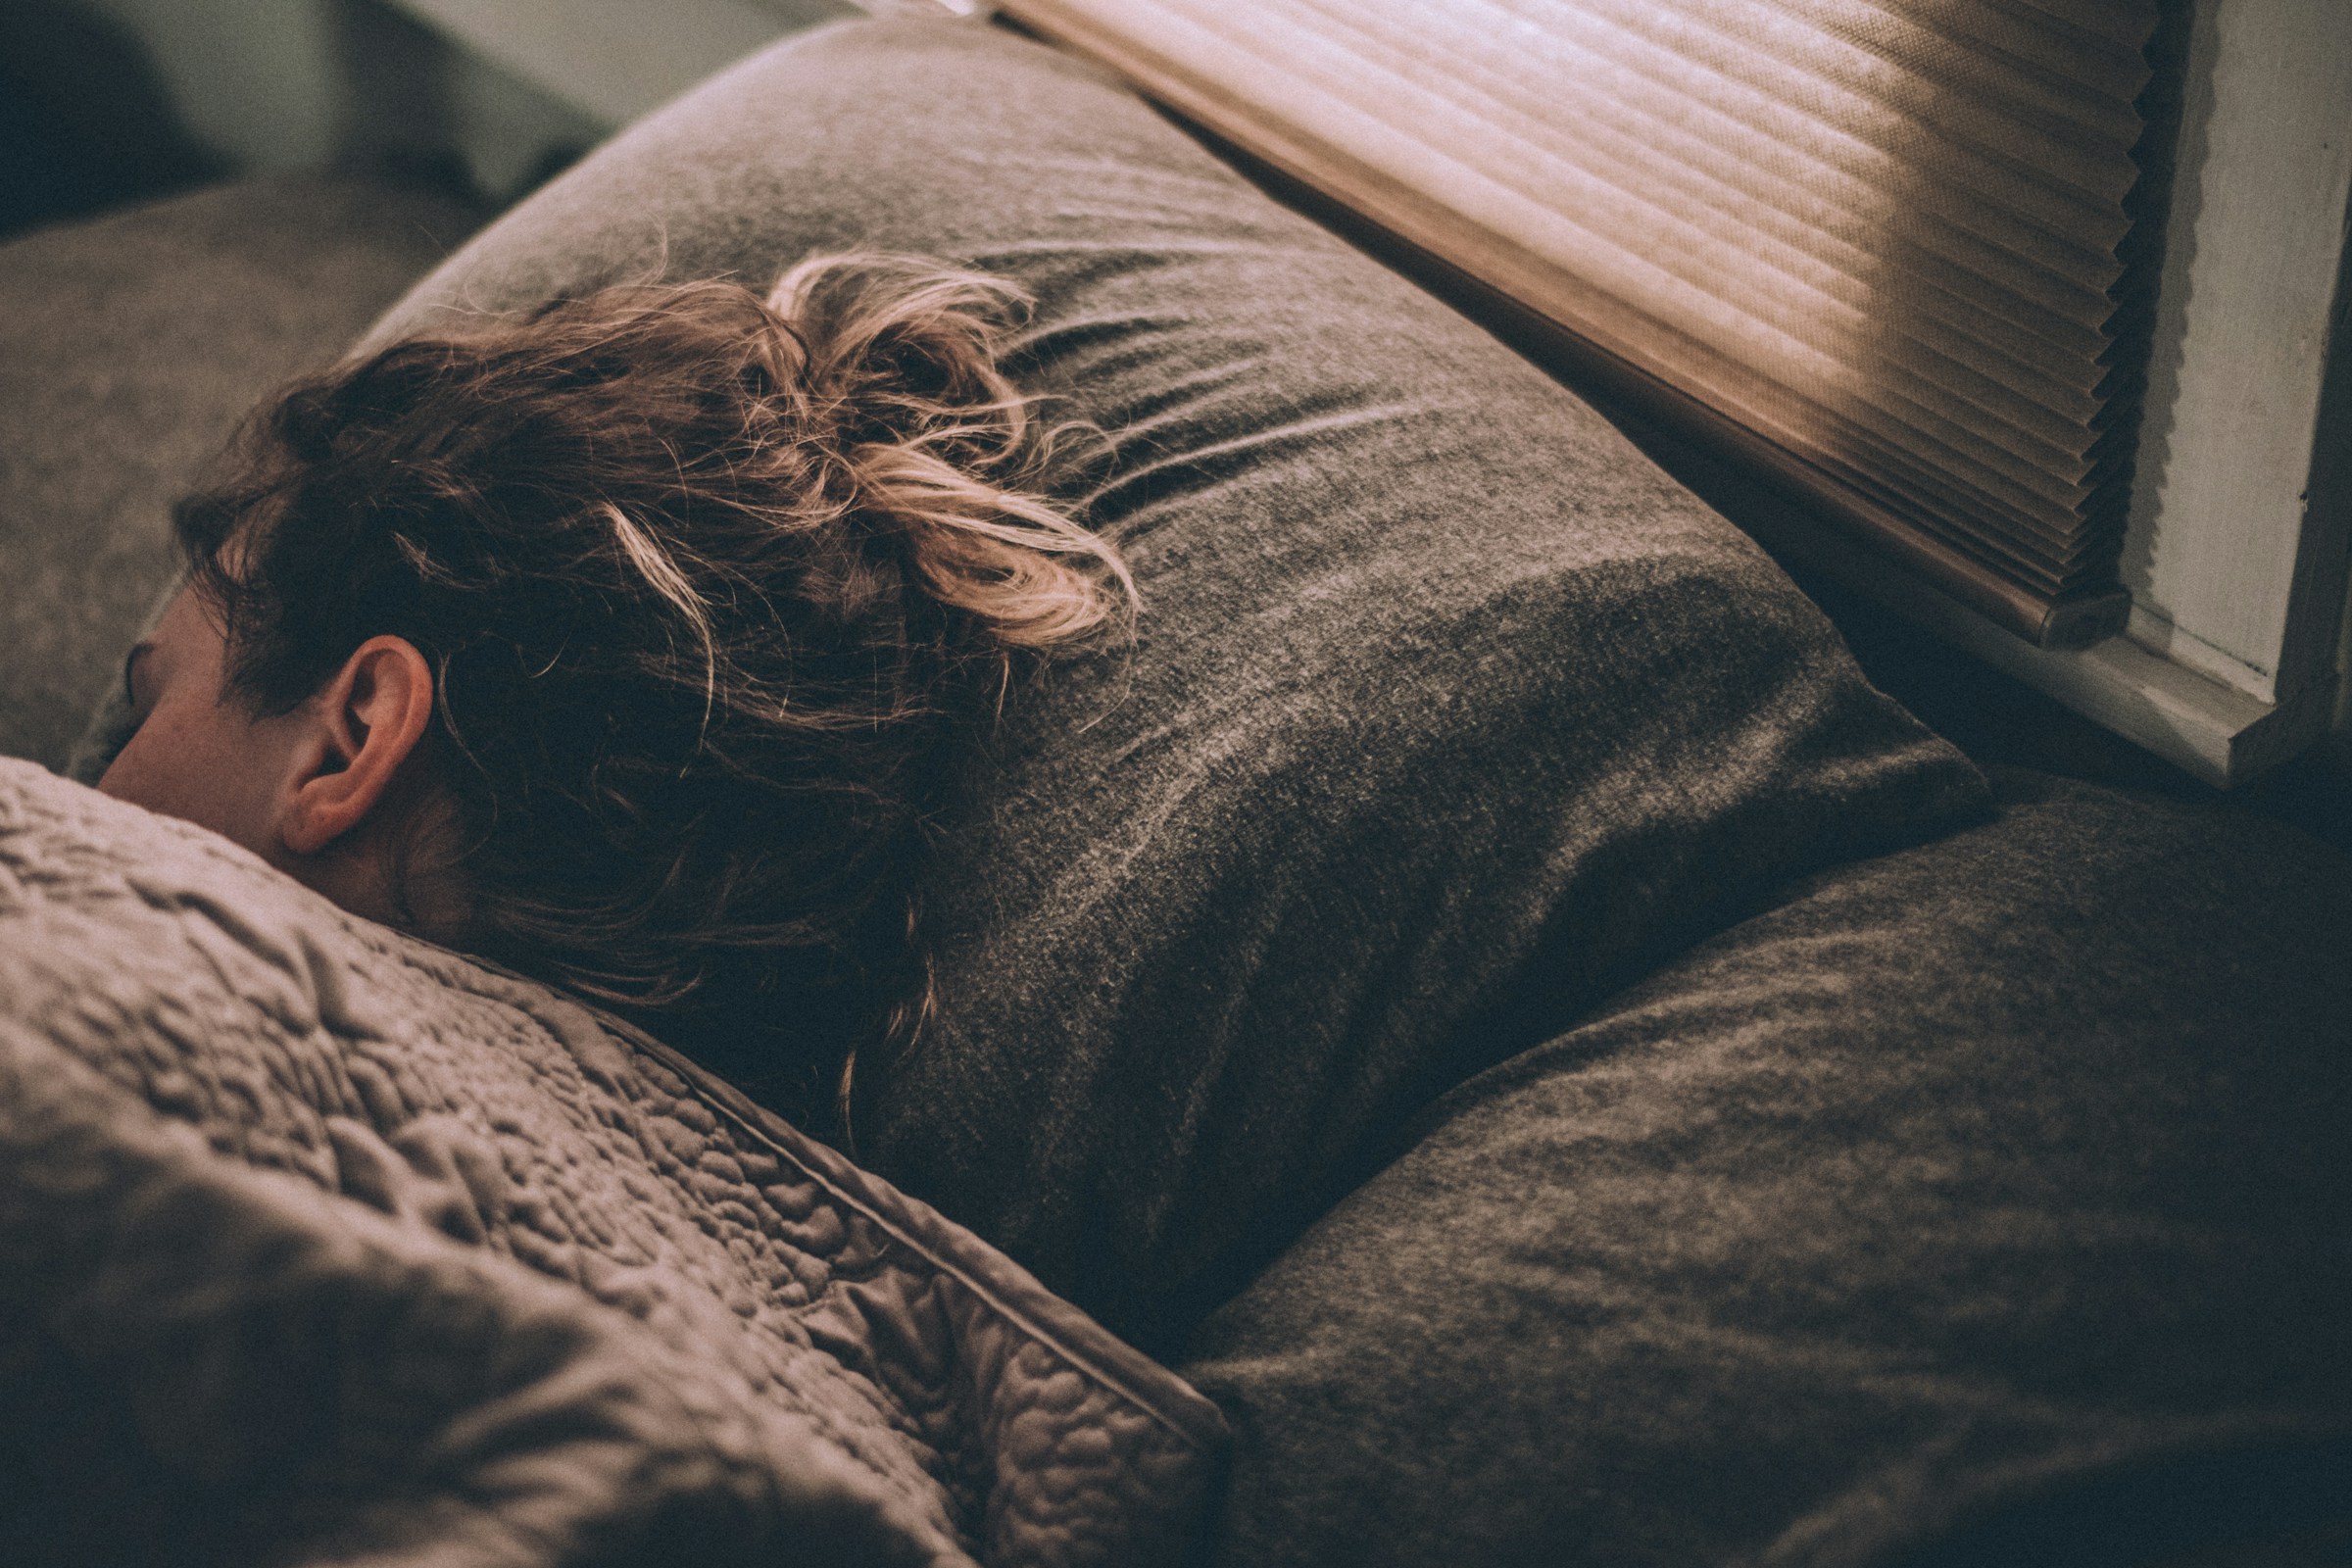 A woman lying in bed | Source: Unsplash